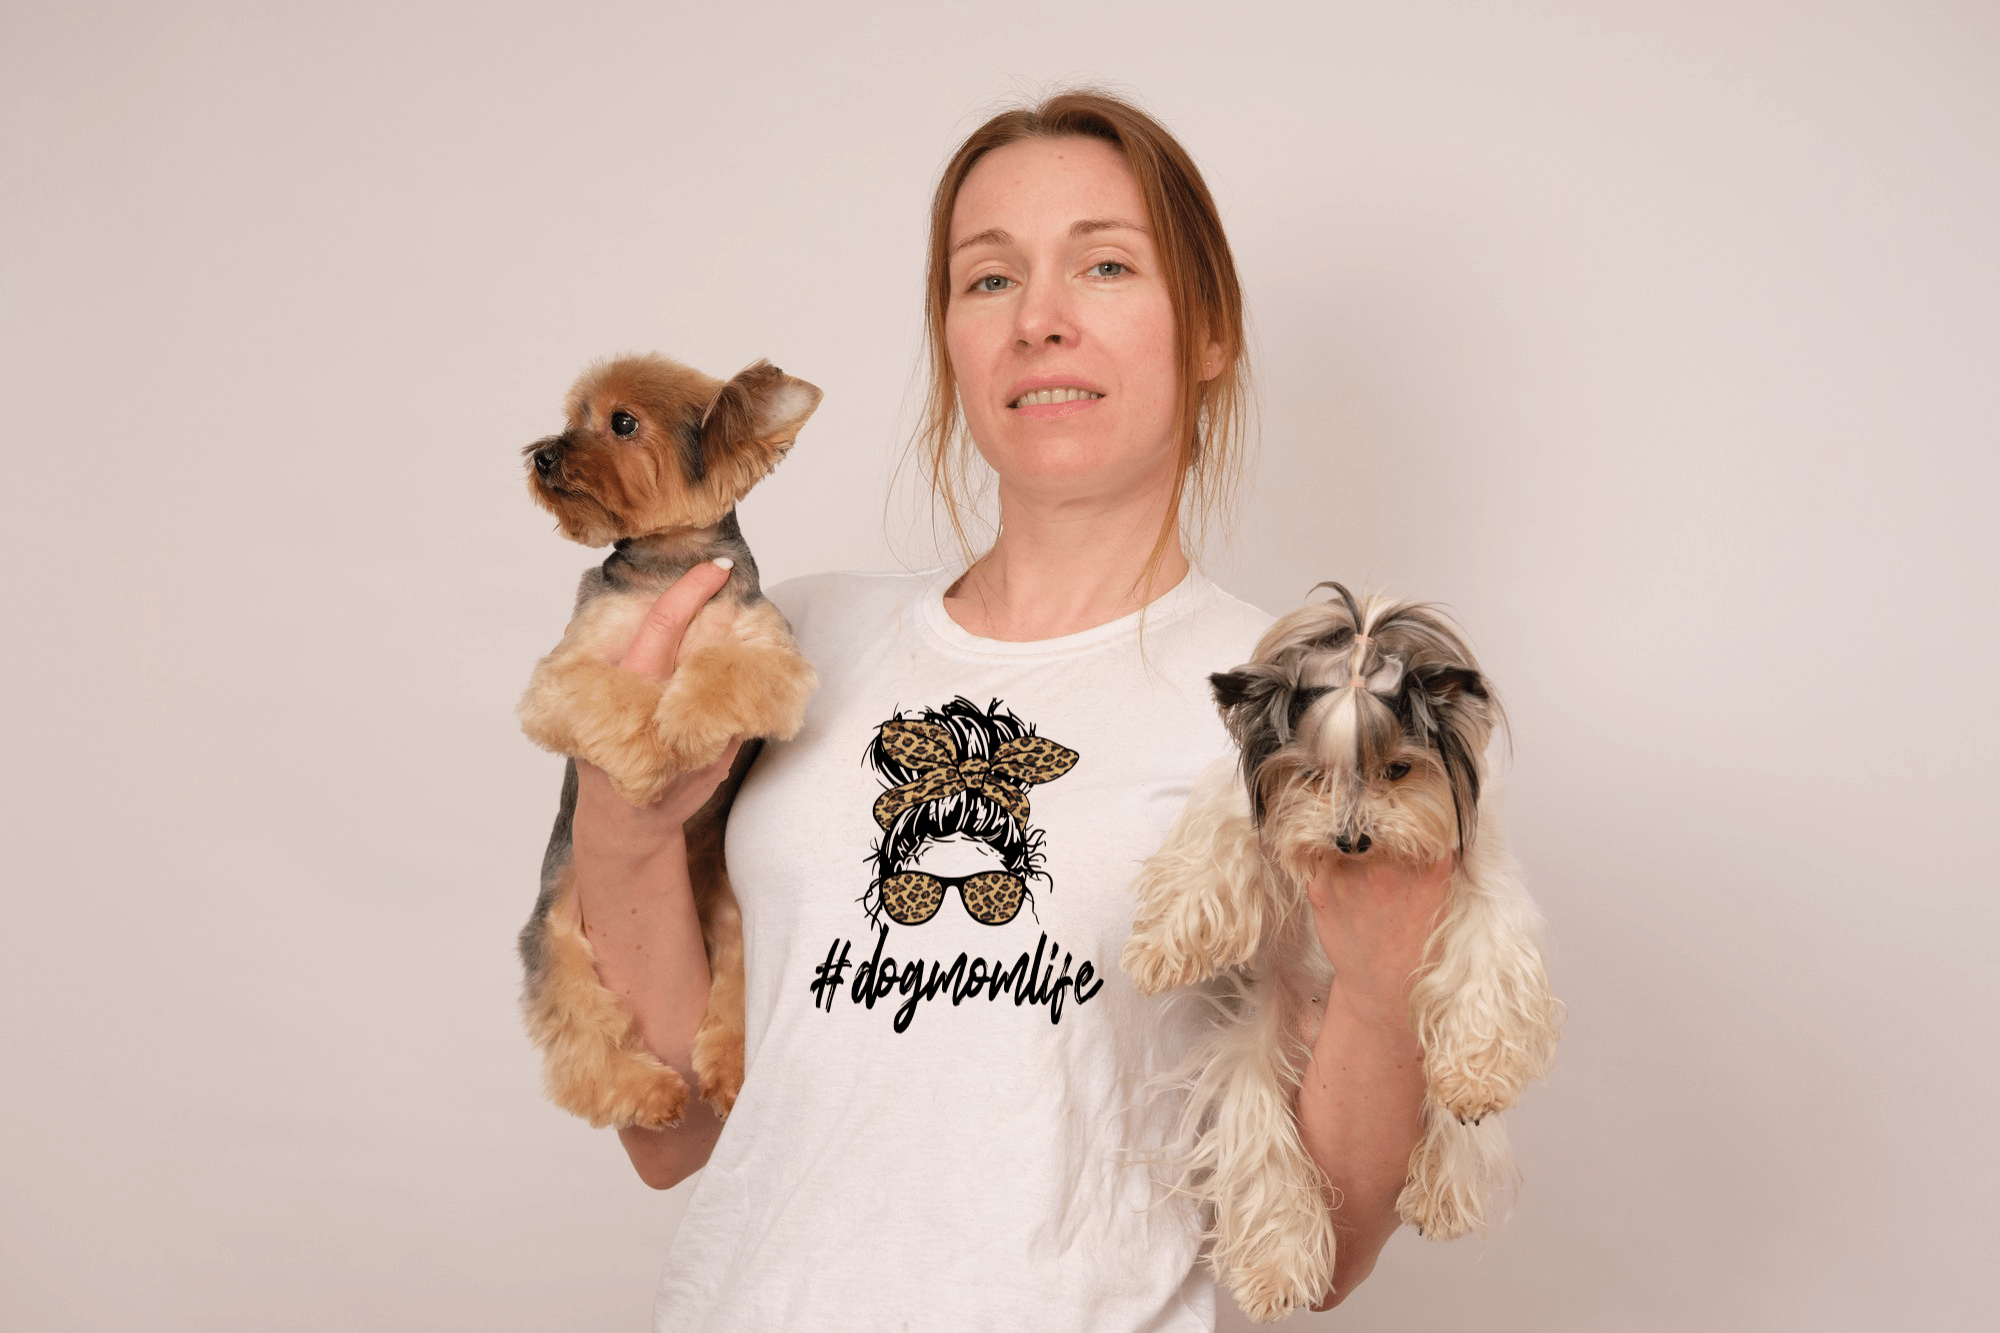 We've added more #Dogmom apparel to the site